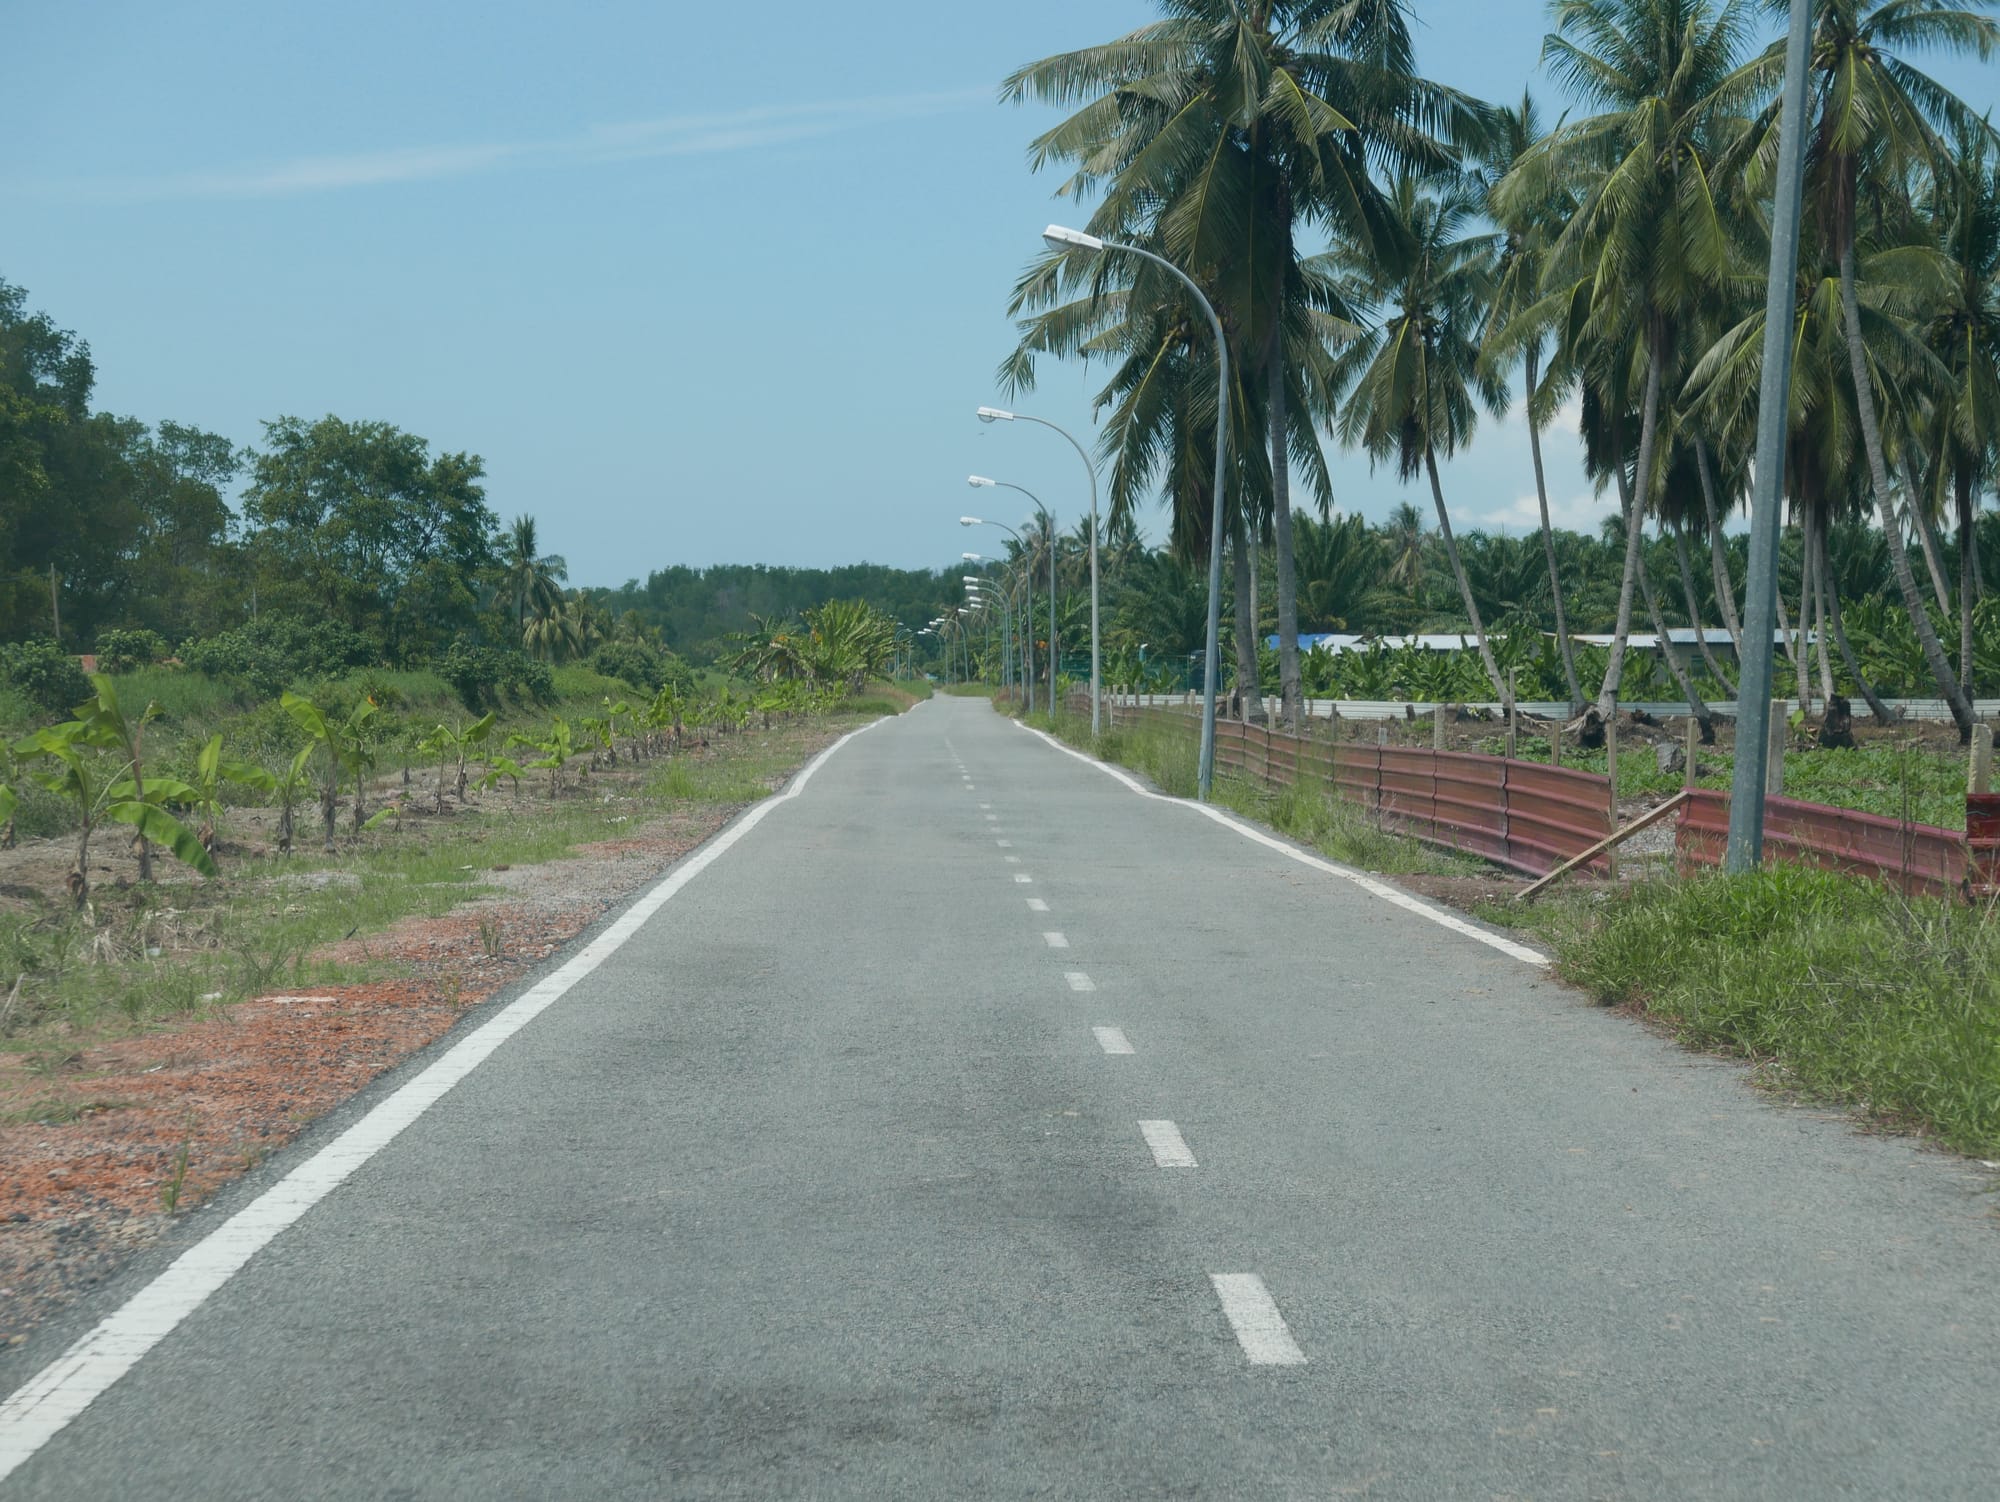 Photo by Author — the road towards Tanjung Piai National Park